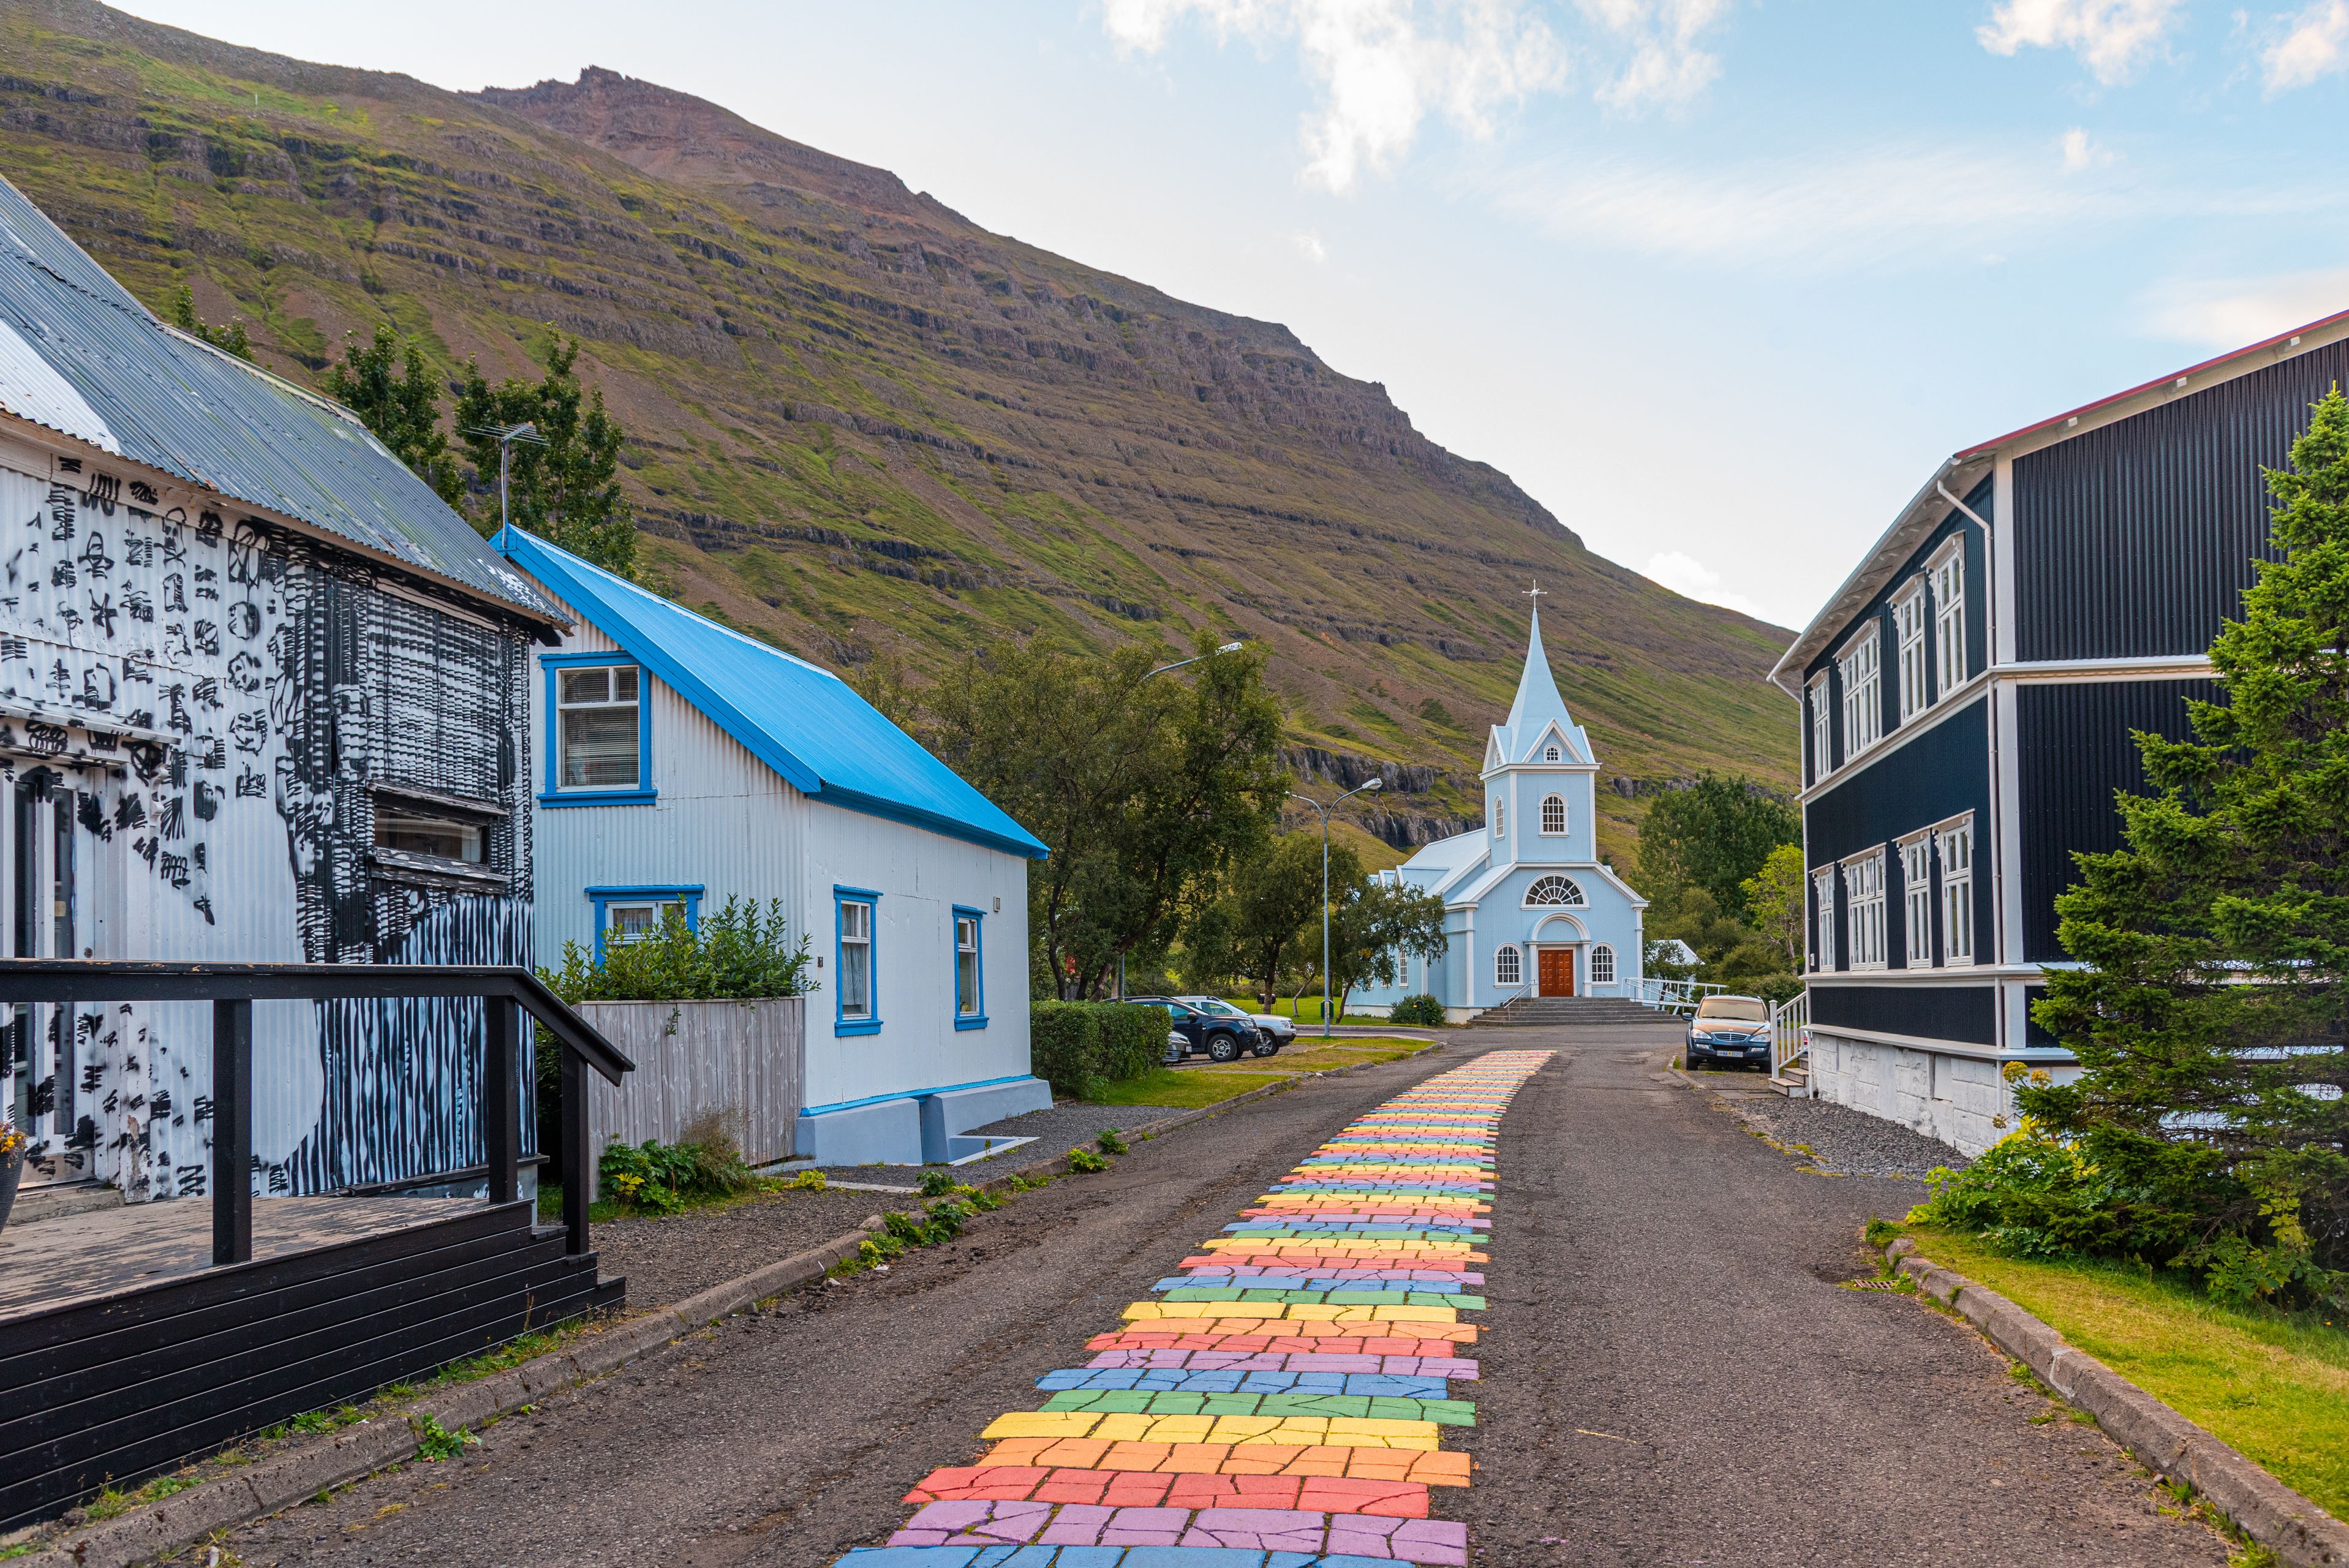 The vibrant Rainbow Road in Seydisfjordur, Iceland, stretching towards a quaint town set against mountainous scenery.